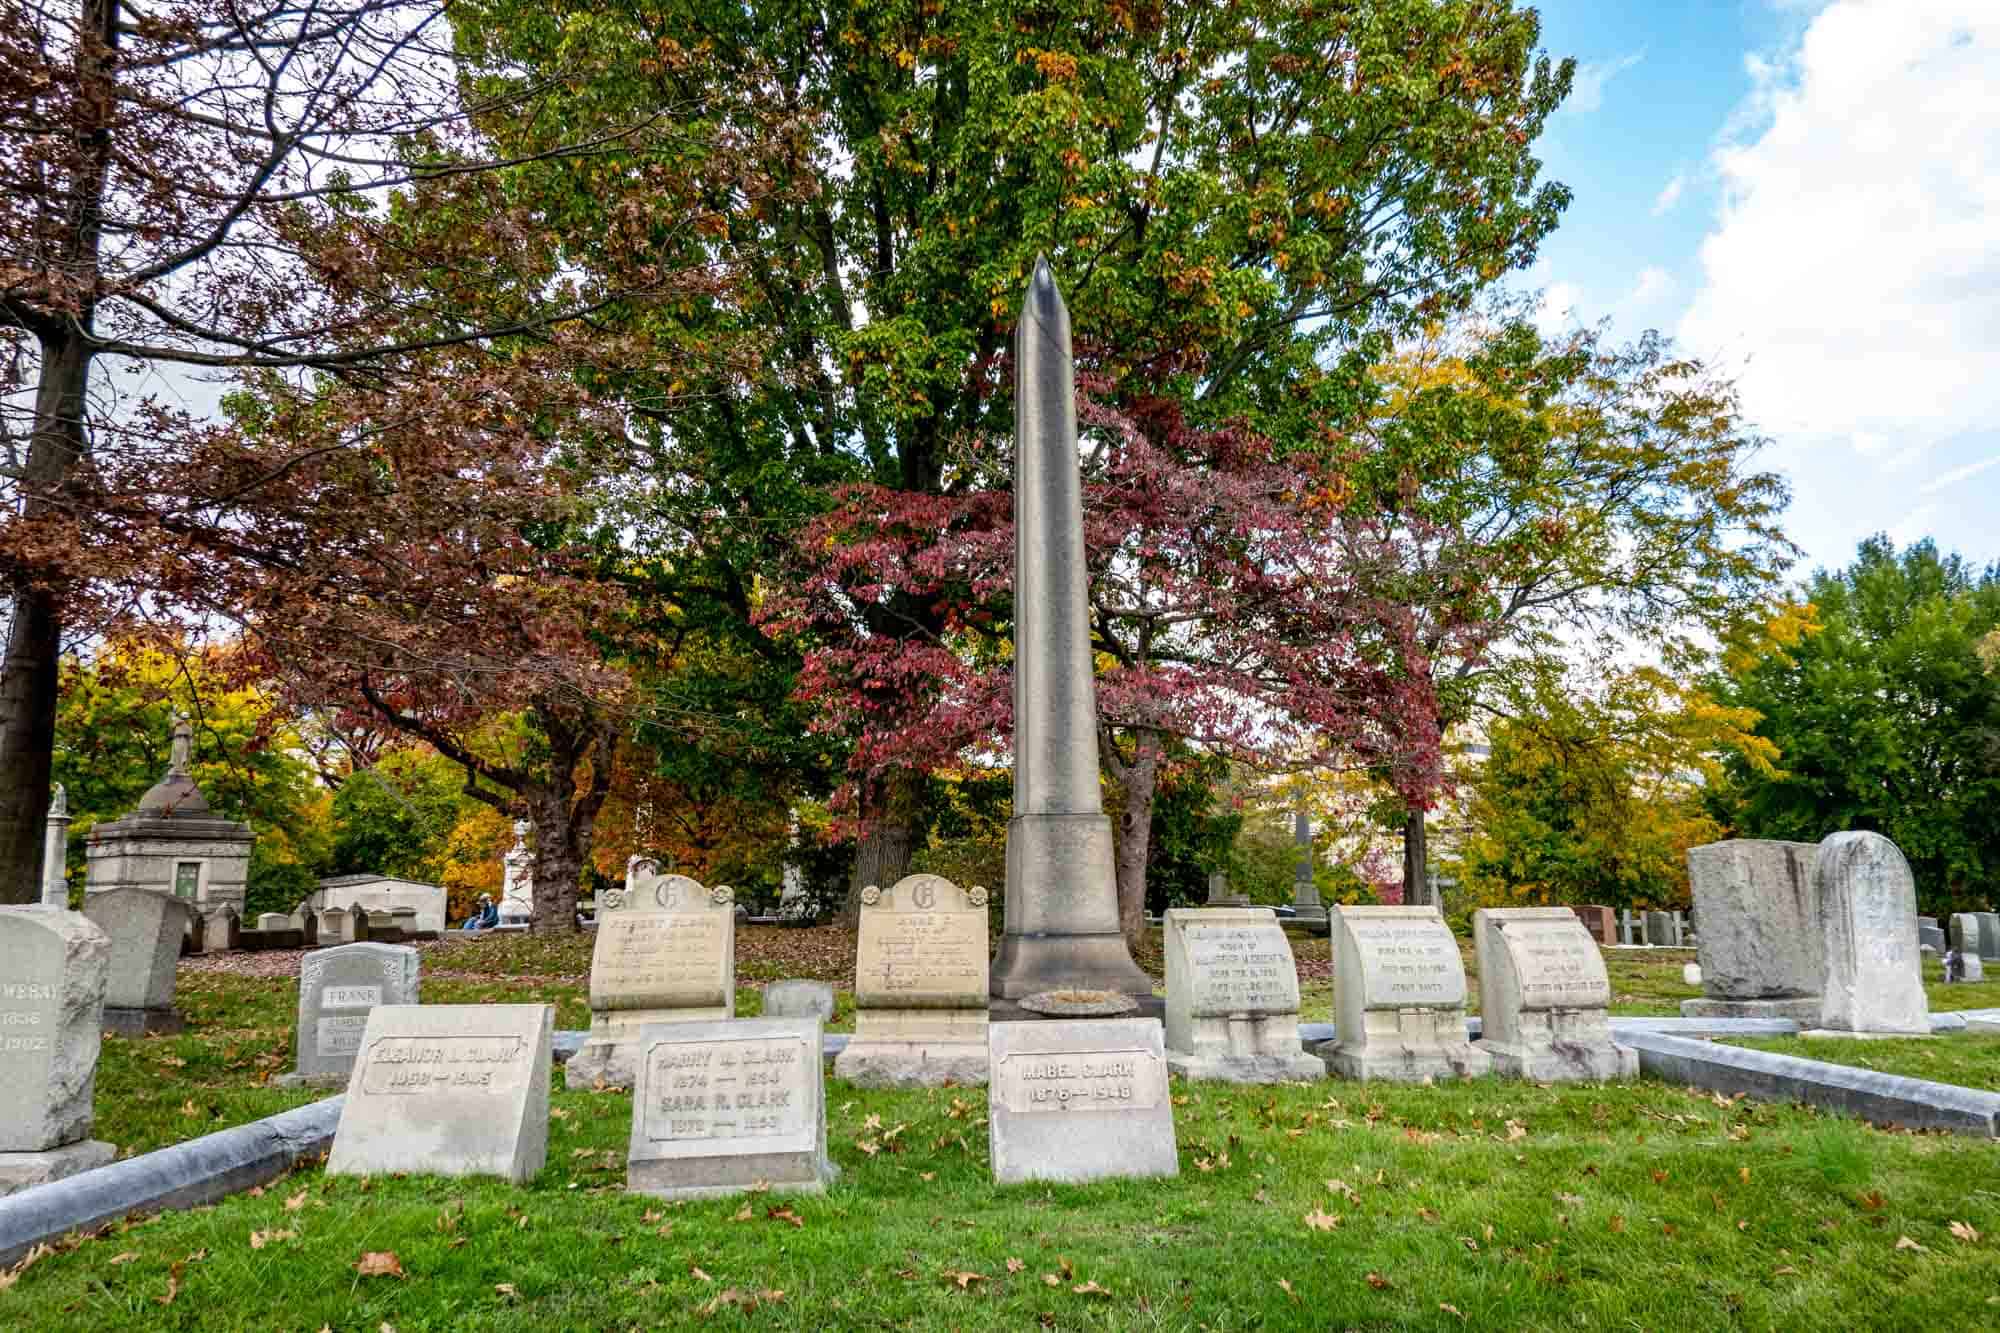 Row of stone headstones in a family plot with a large obelisk in the center